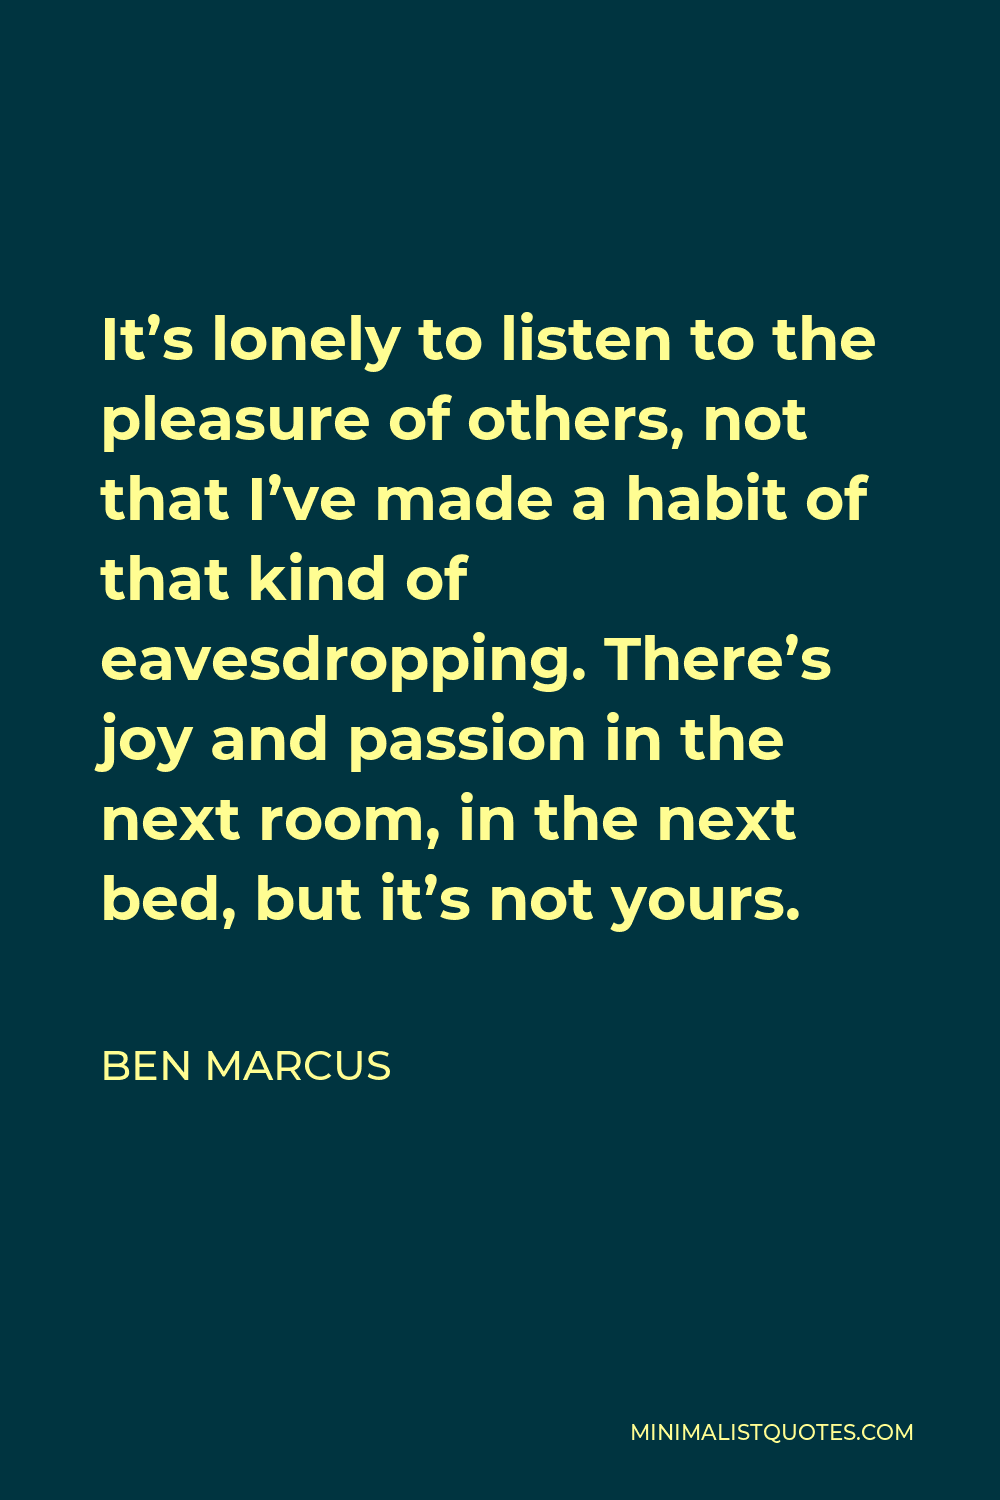 Ben Marcus Quote - It’s lonely to listen to the pleasure of others, not that I’ve made a habit of that kind of eavesdropping. There’s joy and passion in the next room, in the next bed, but it’s not yours.